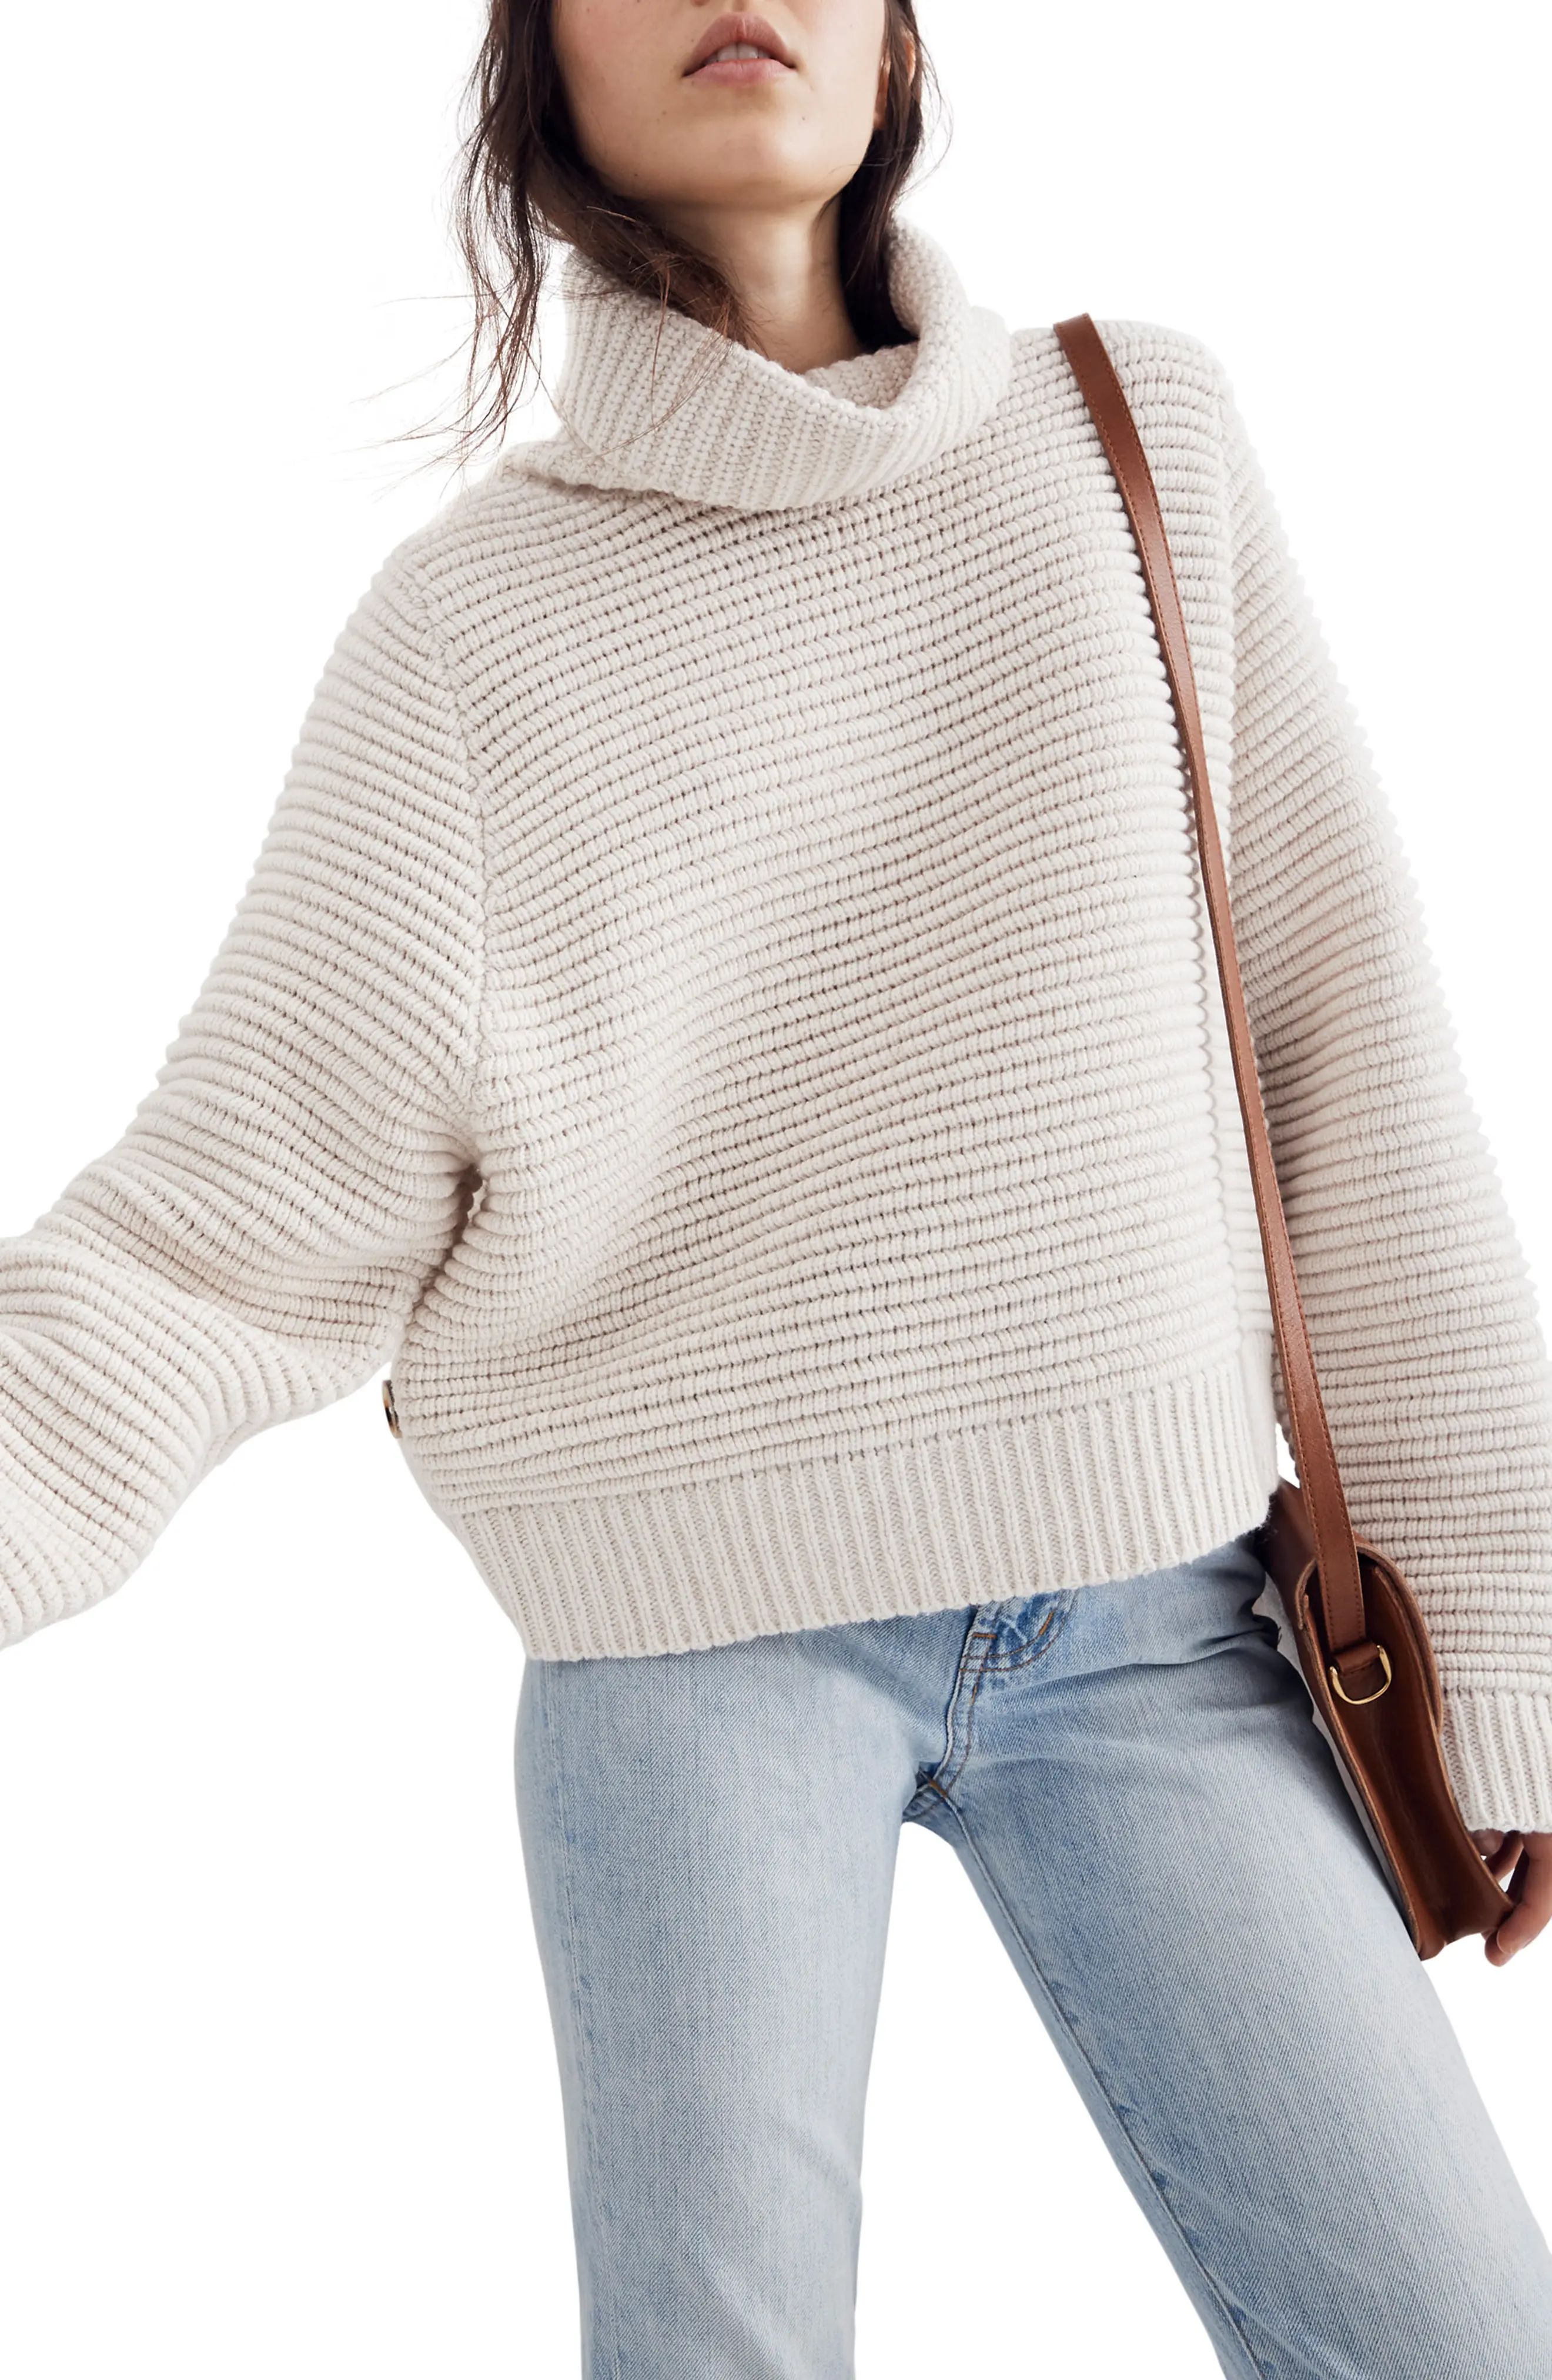 Madewell Side Button Turtleneck Sweater | Nordstrom